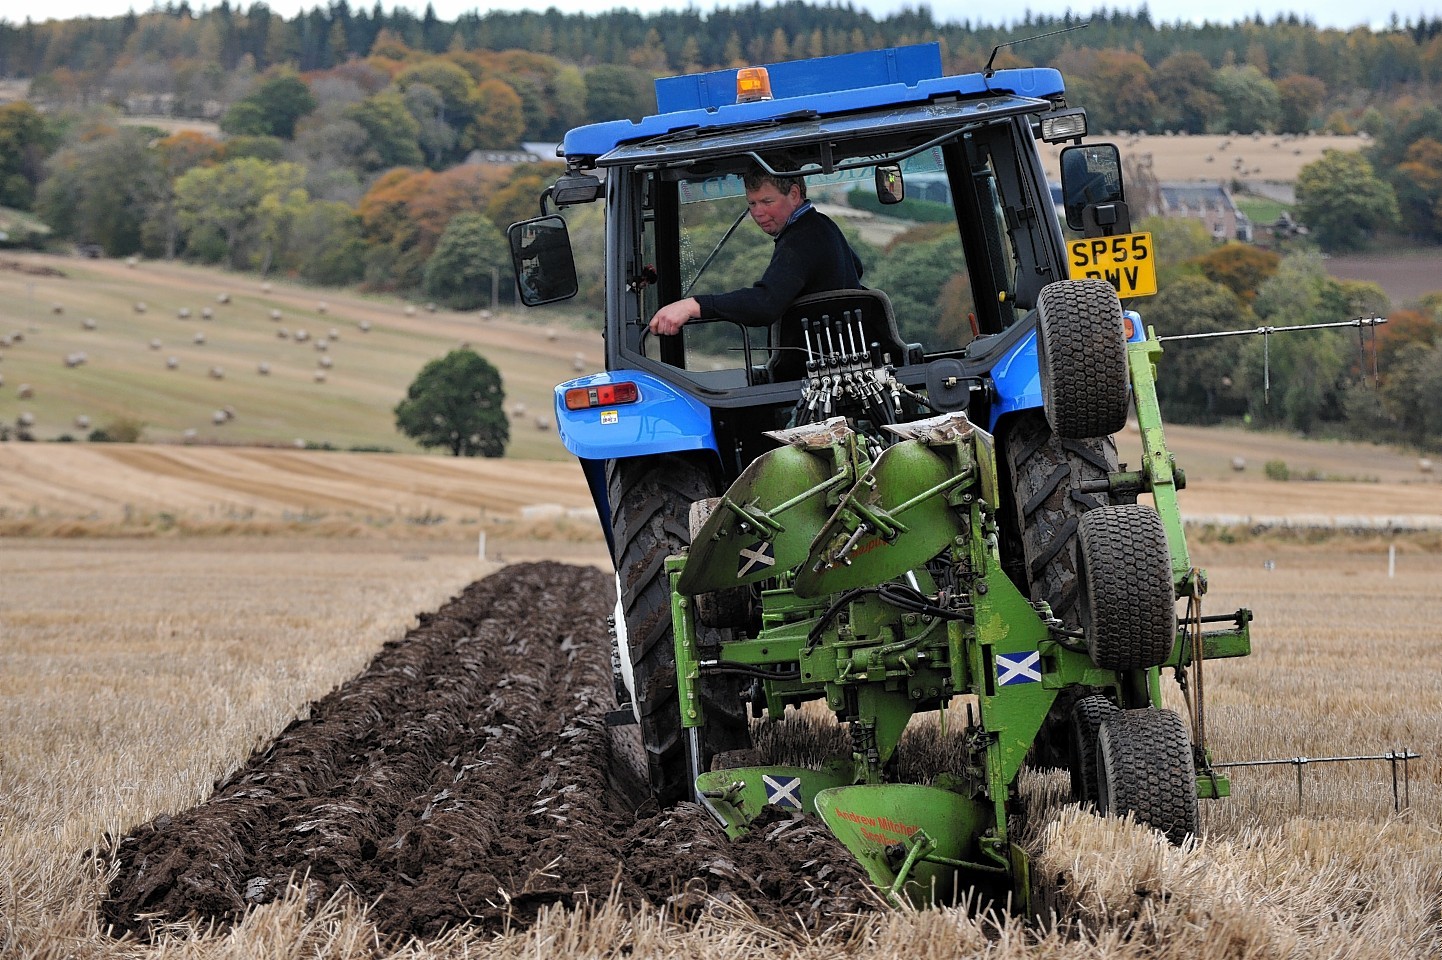 Preparations are under way for the Scottish Ploughing Championships